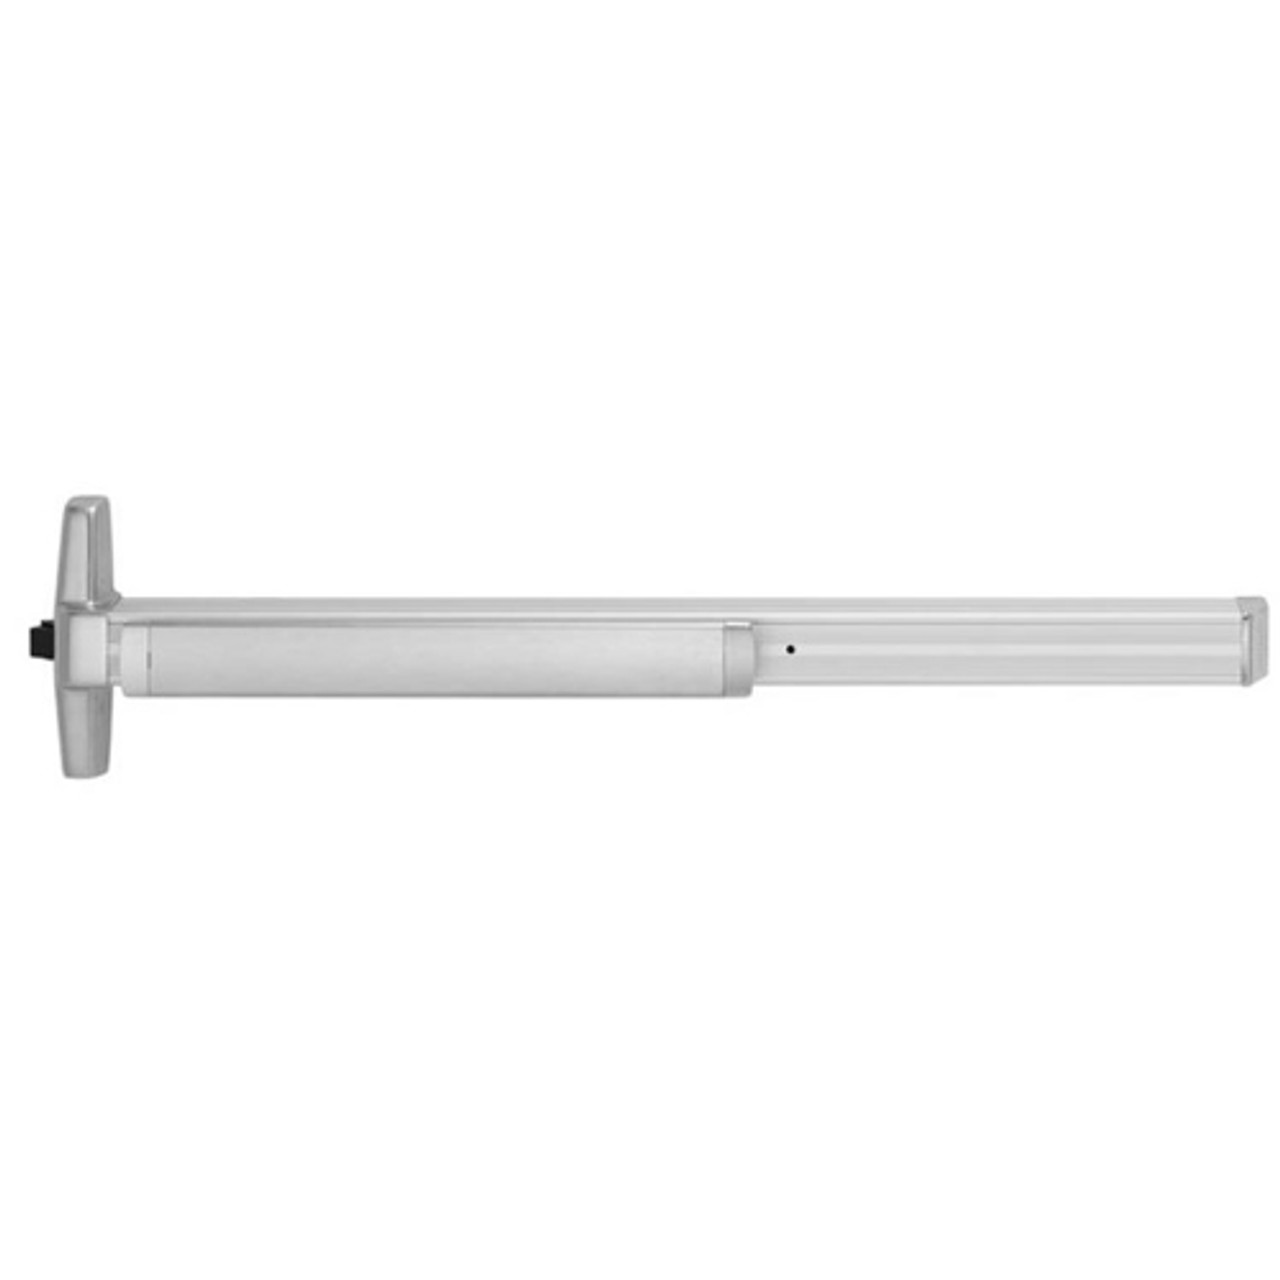 33A-EO-US28-4 Von Duprin Exit Device in Anodized Aluminum